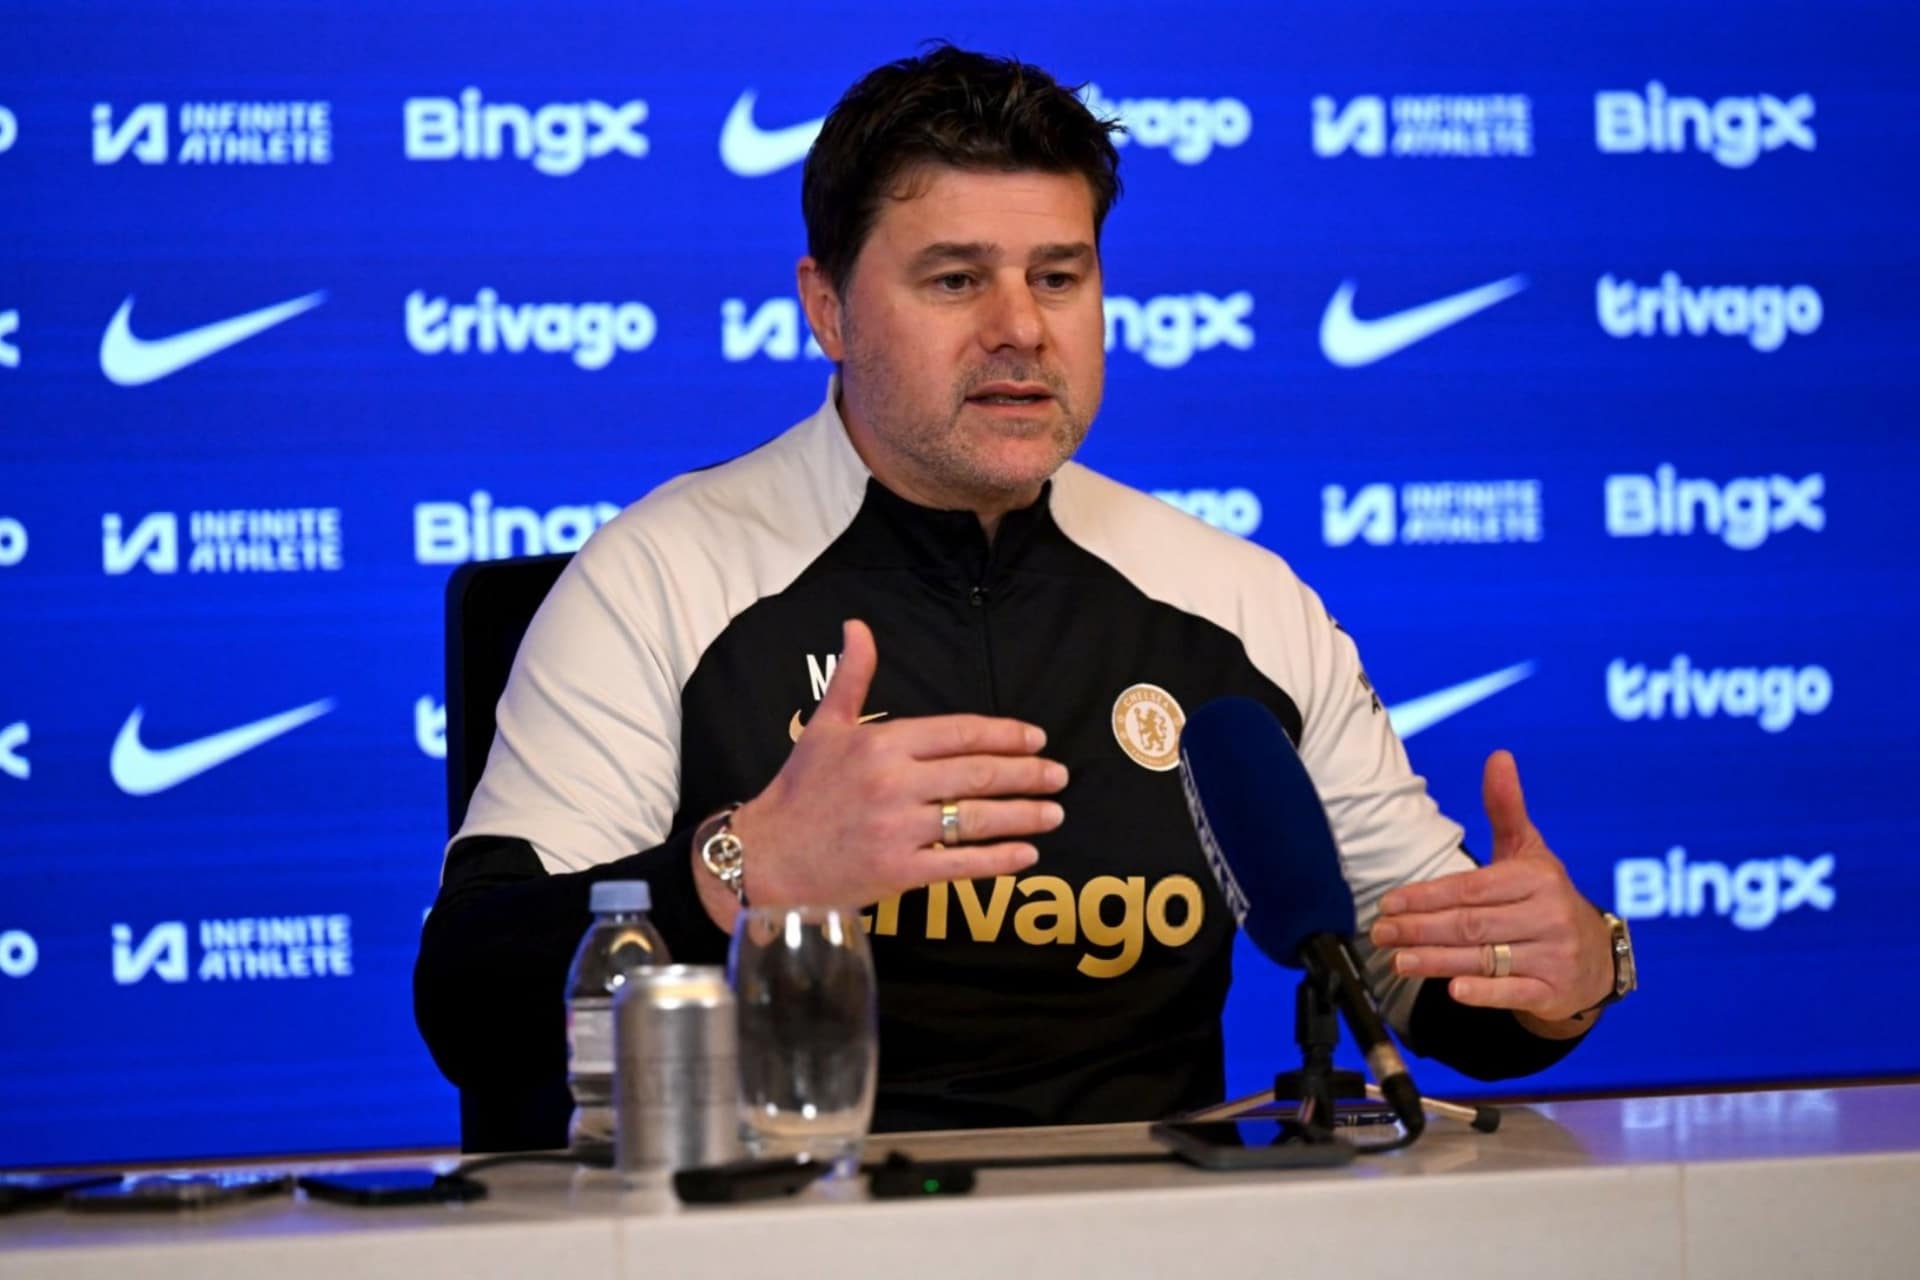 "Never" - Mauricio Pochettino vows not to quit as Chelsea manager